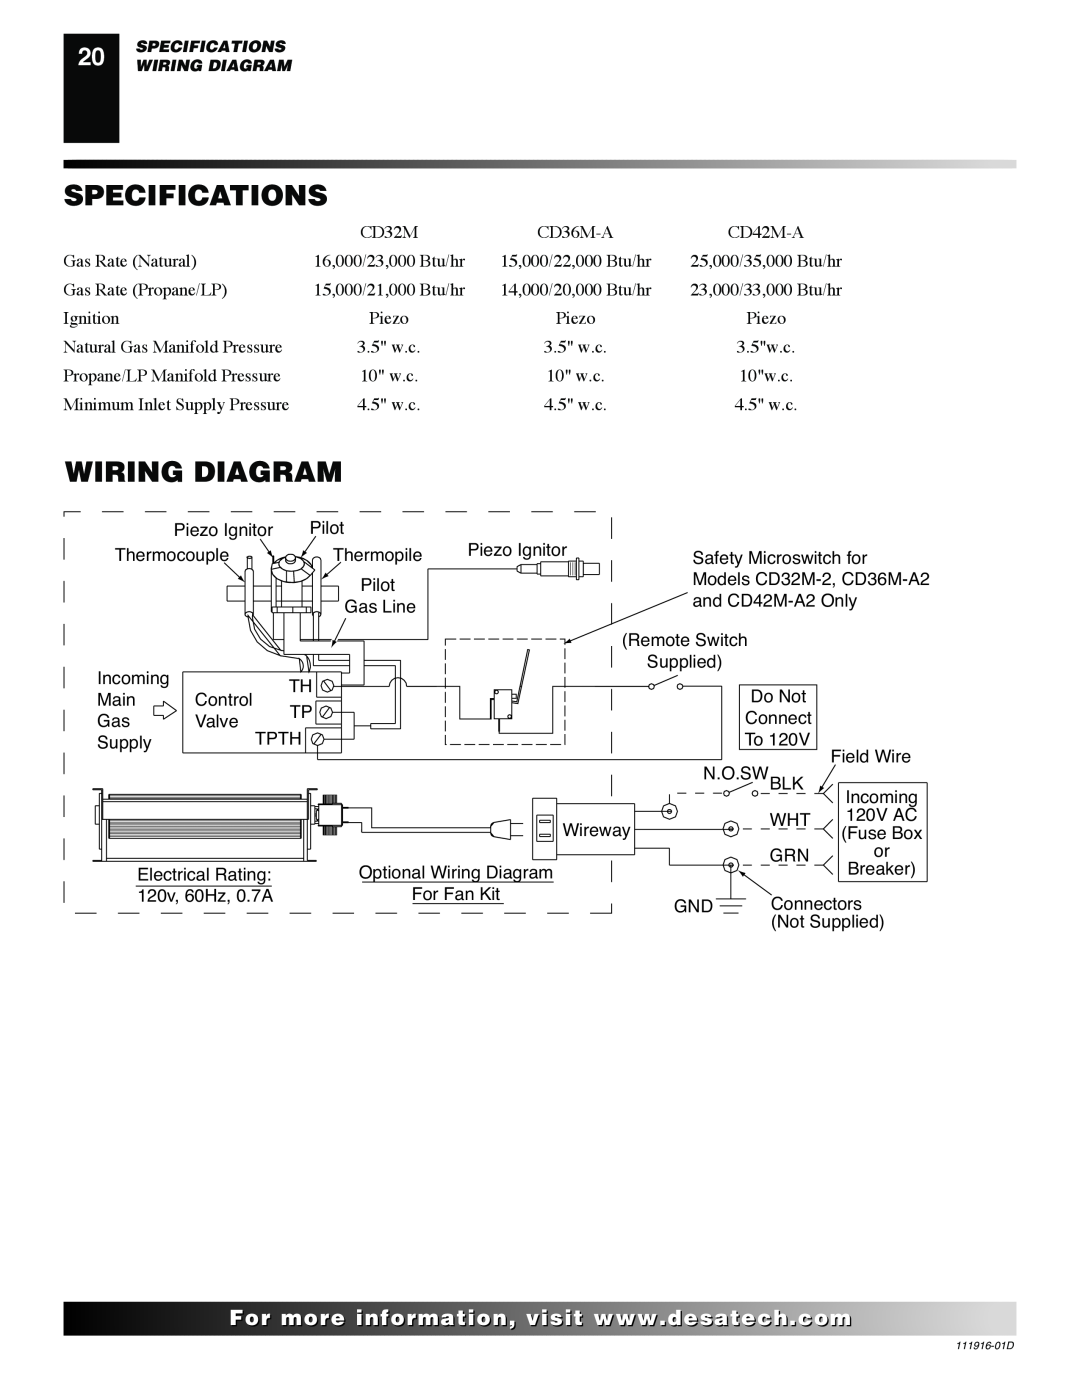 Desa CD42M (-A)(-A2), CD36M, CD32M, CD42M installation manual Specifications, Wiring Diagram, For..com 